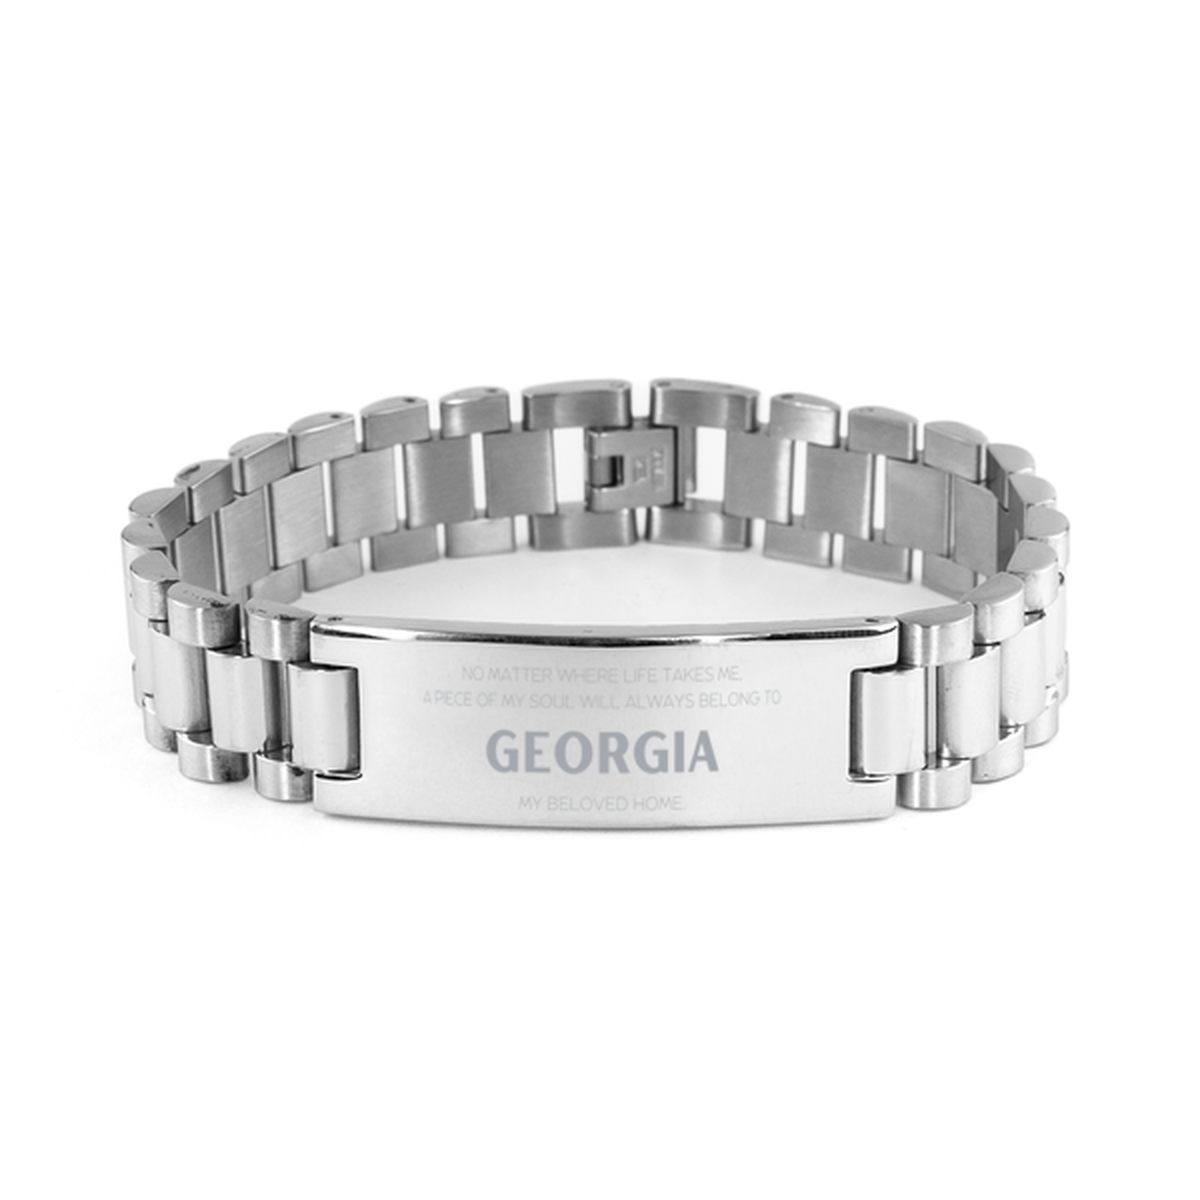 Love Georgia State Gifts, My soul will always belong to Georgia, Proud Ladder Stainless Steel Bracelet, Birthday Unique Gifts For Georgia Men, Women, Friends